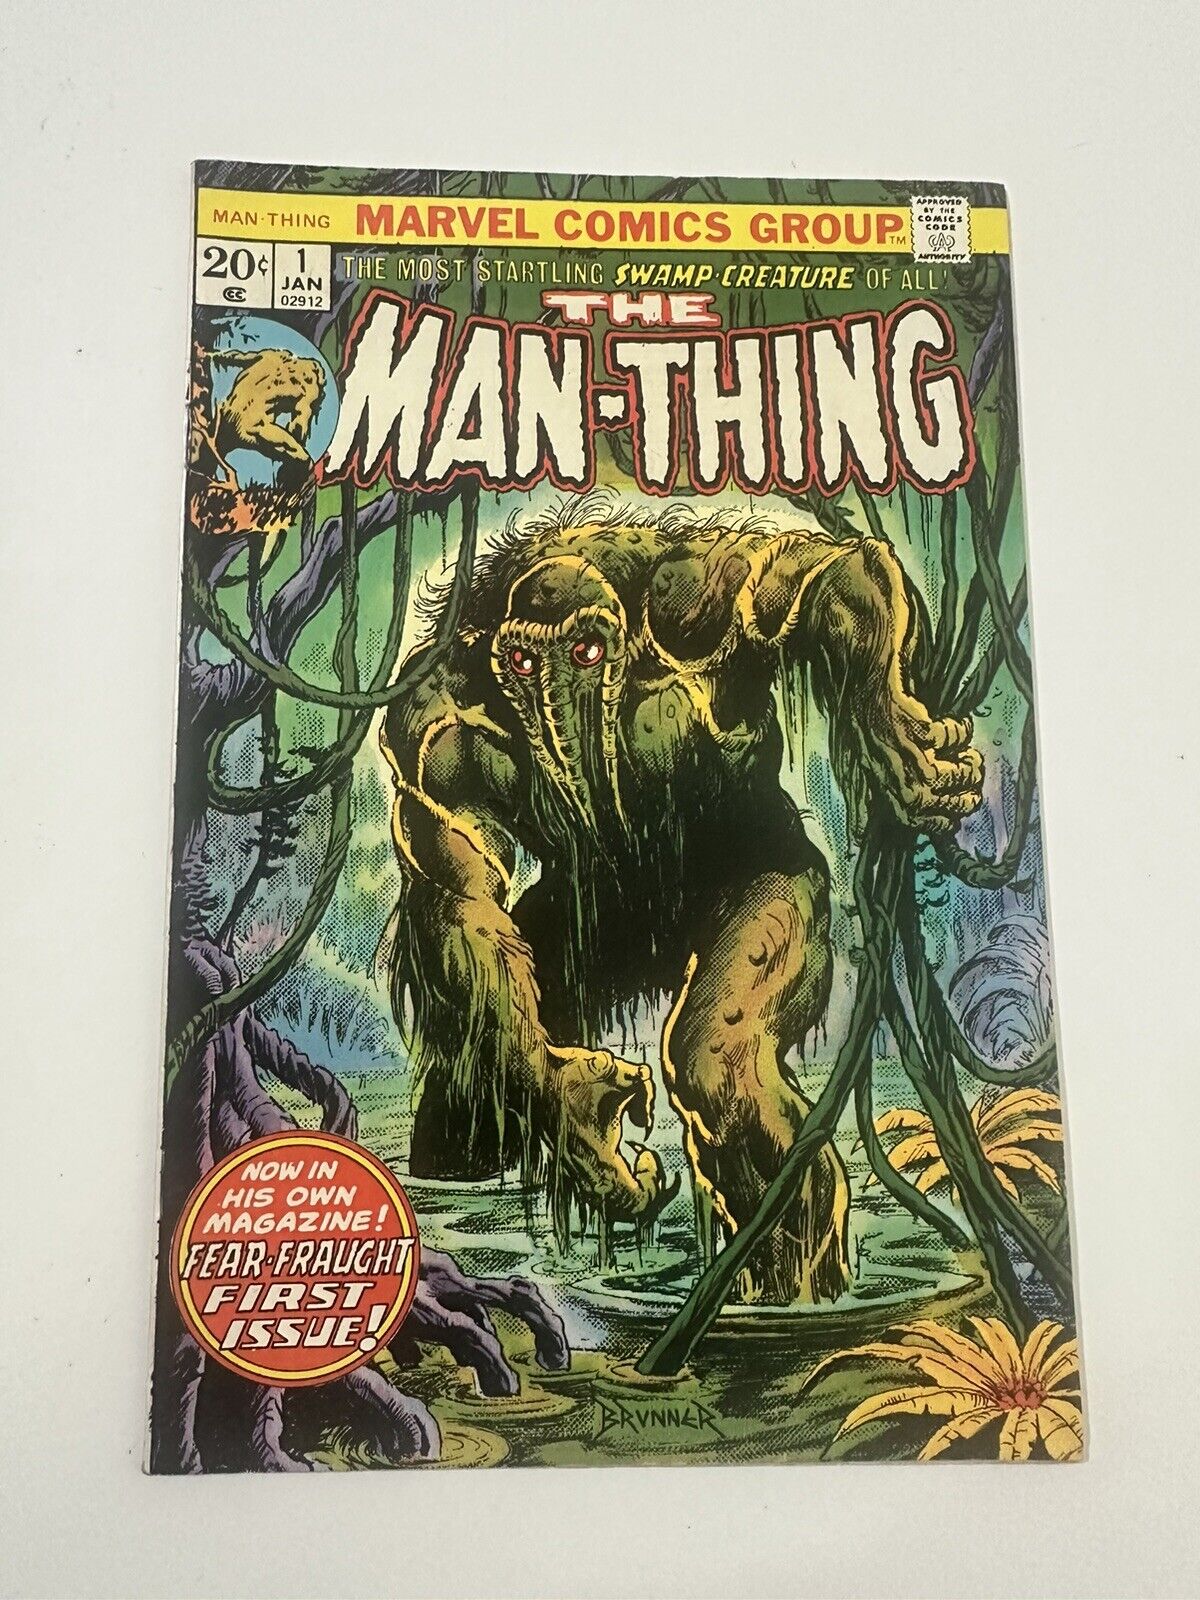 The Man Thing #1 - 1974 High Grade - 2nd Appearance Howard the Duck 